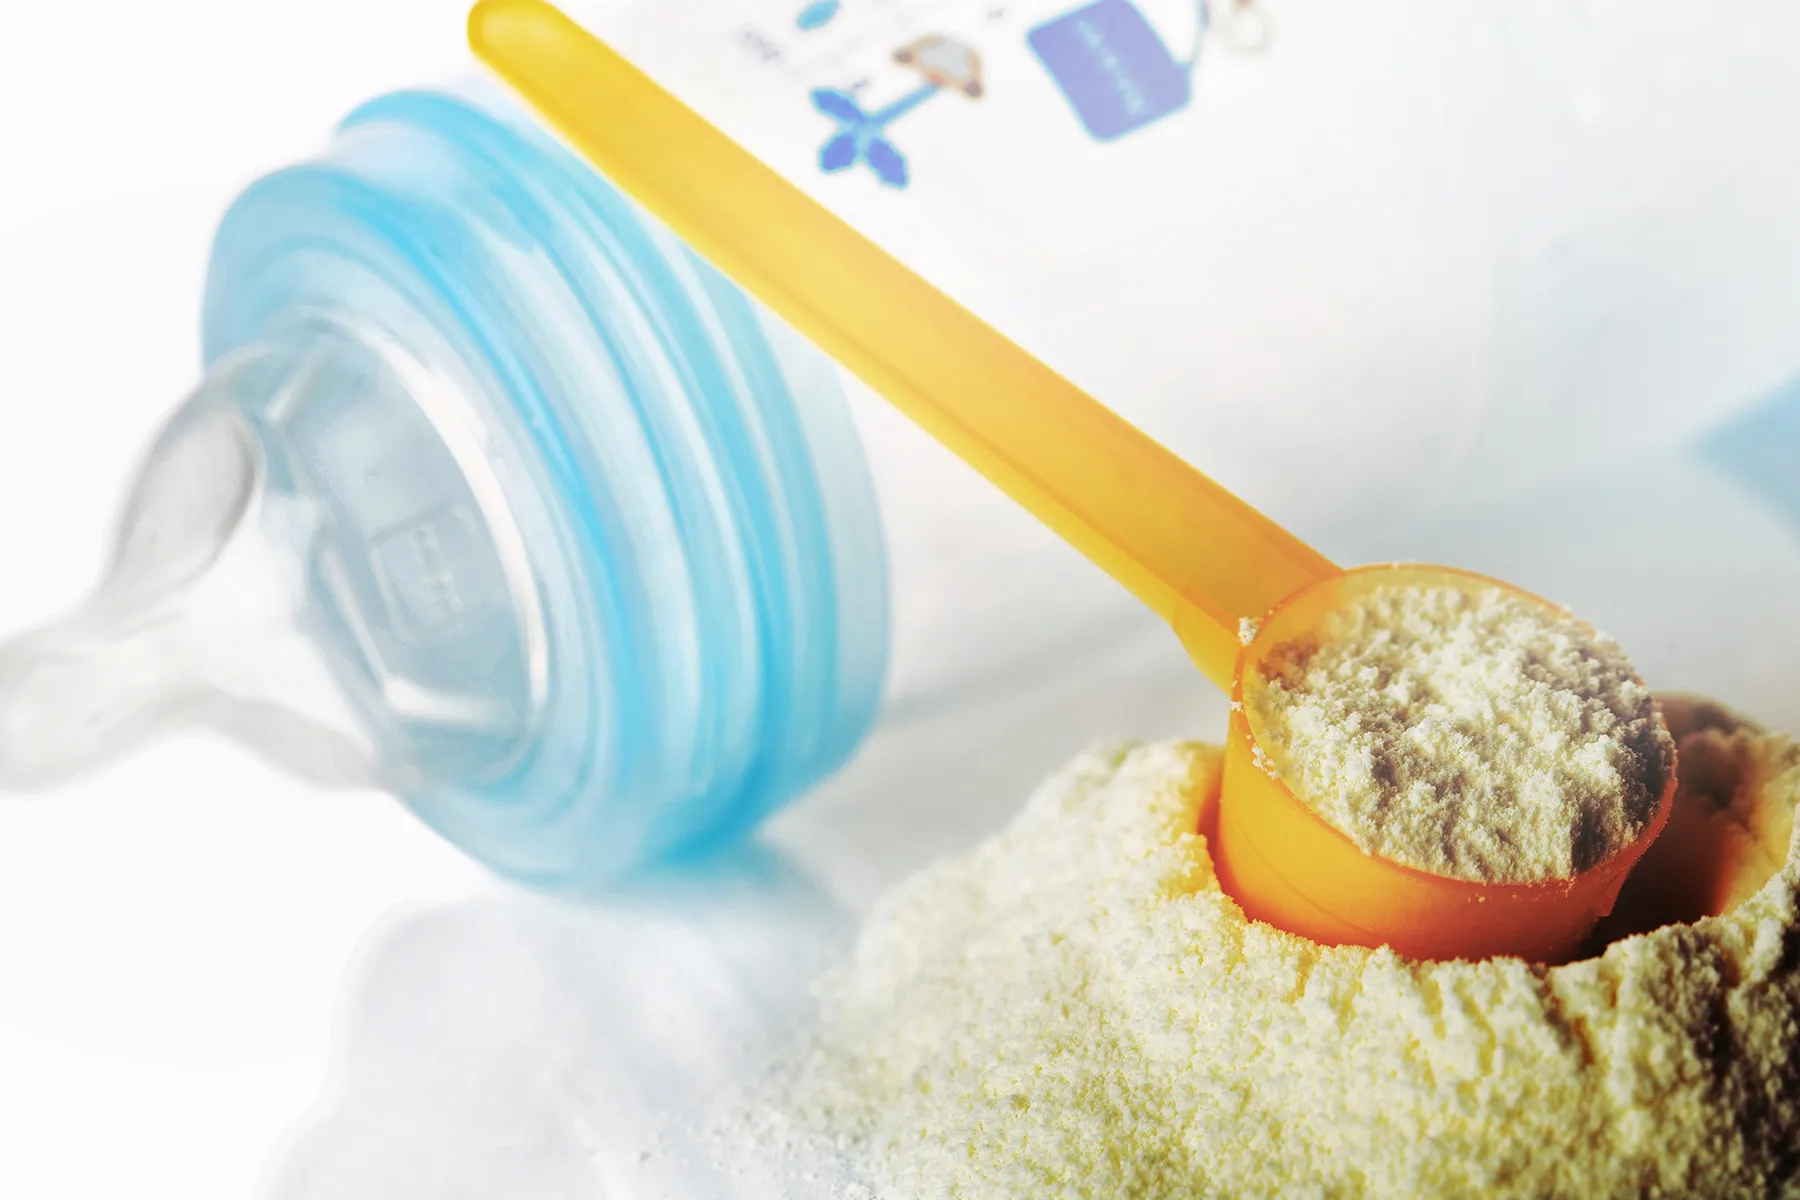 FDA Allows Abbott to Release Some Infant Formula Amid Shortage